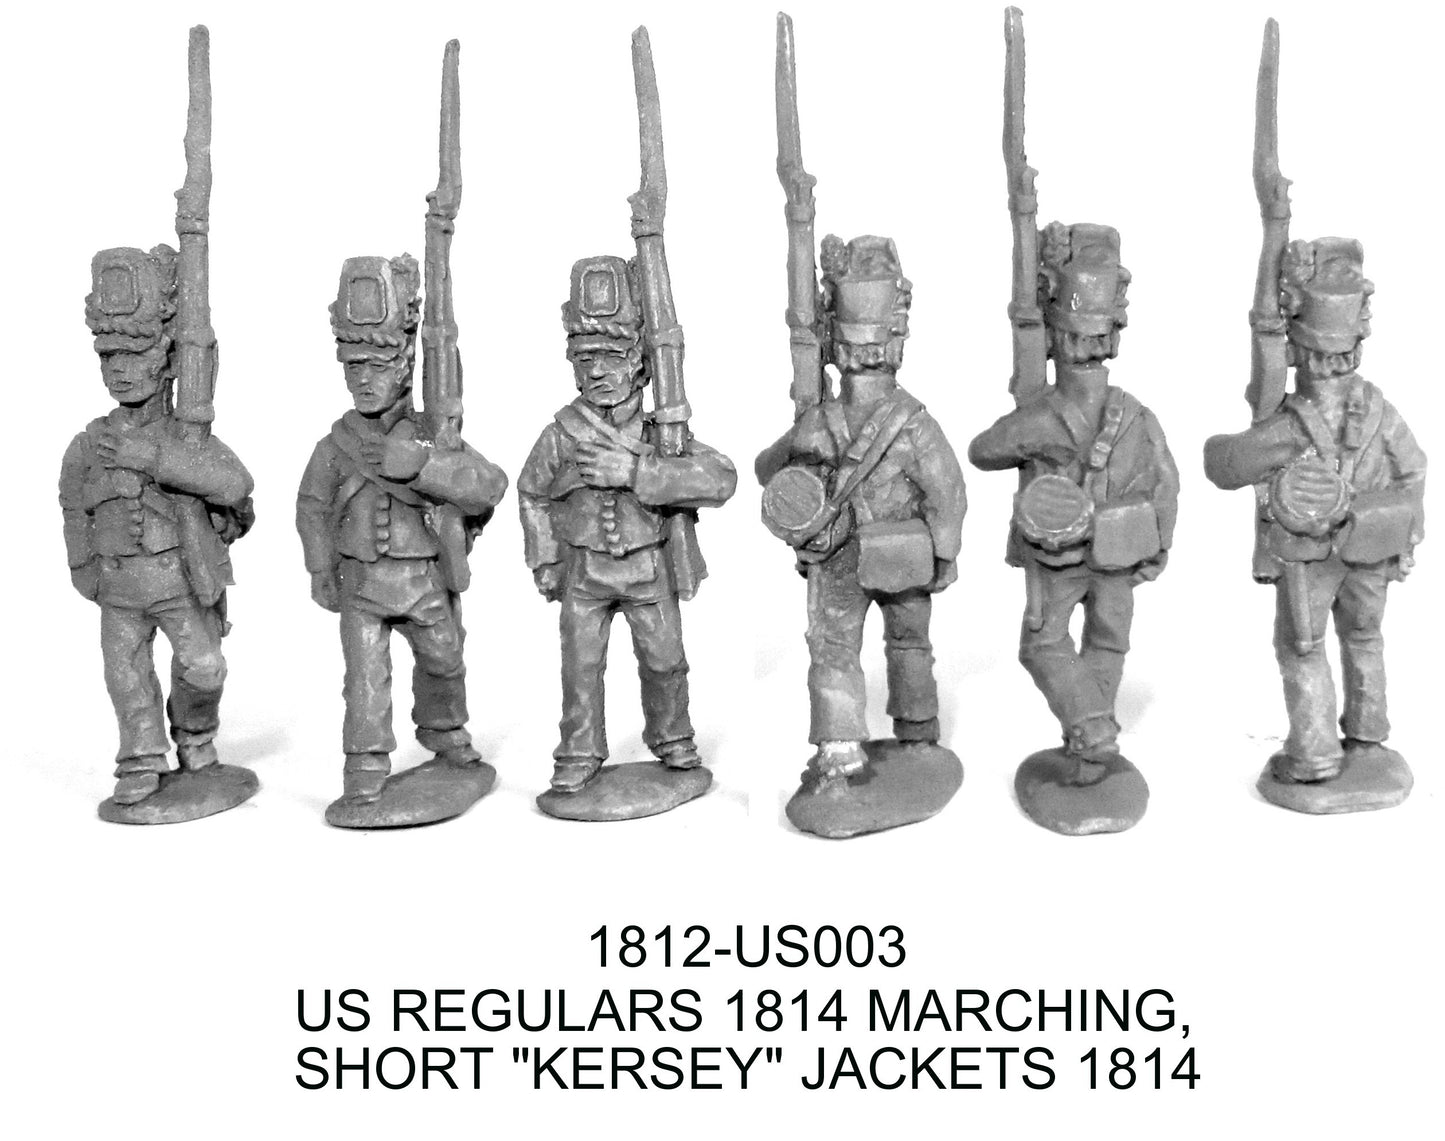 US Regulars 1814 in Short Jackets (Scott's Brigade) Marching "Support Arms"